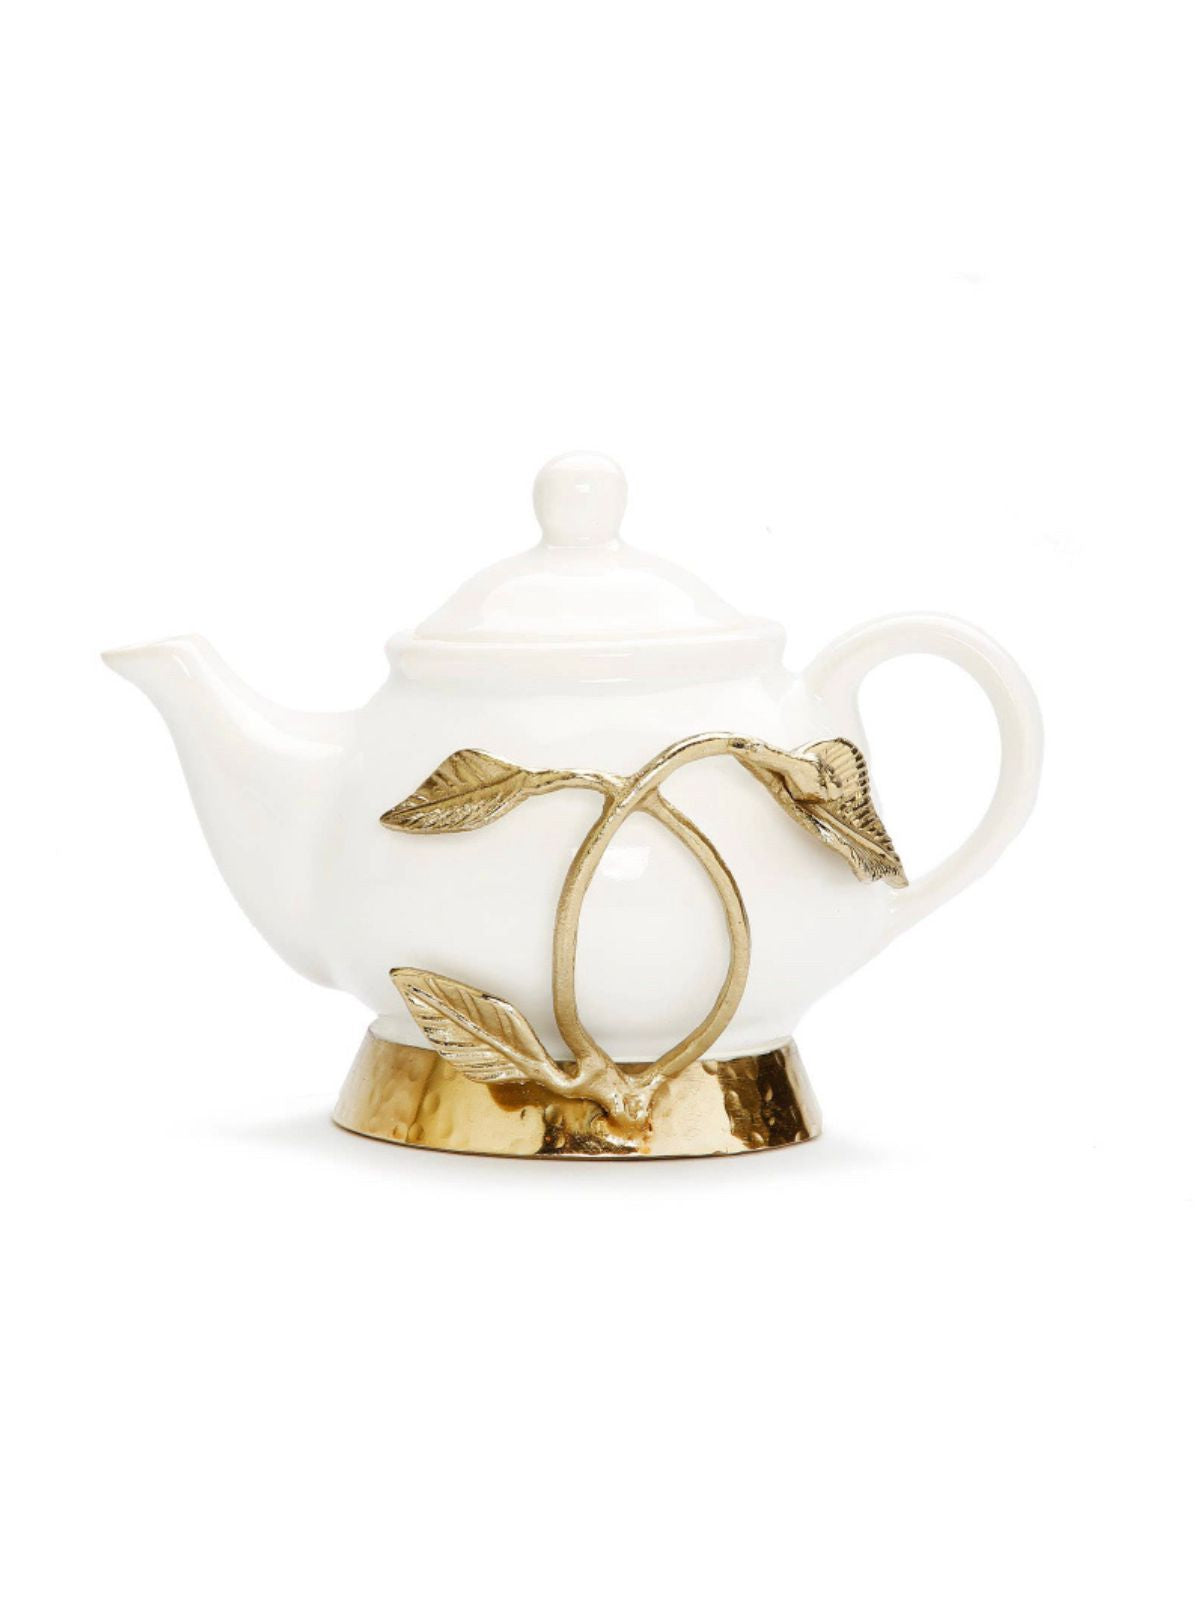 This beautiful kettle will make an elegant setting for tea time. The is a beautiful white design with gold leaf details and a gold base.   